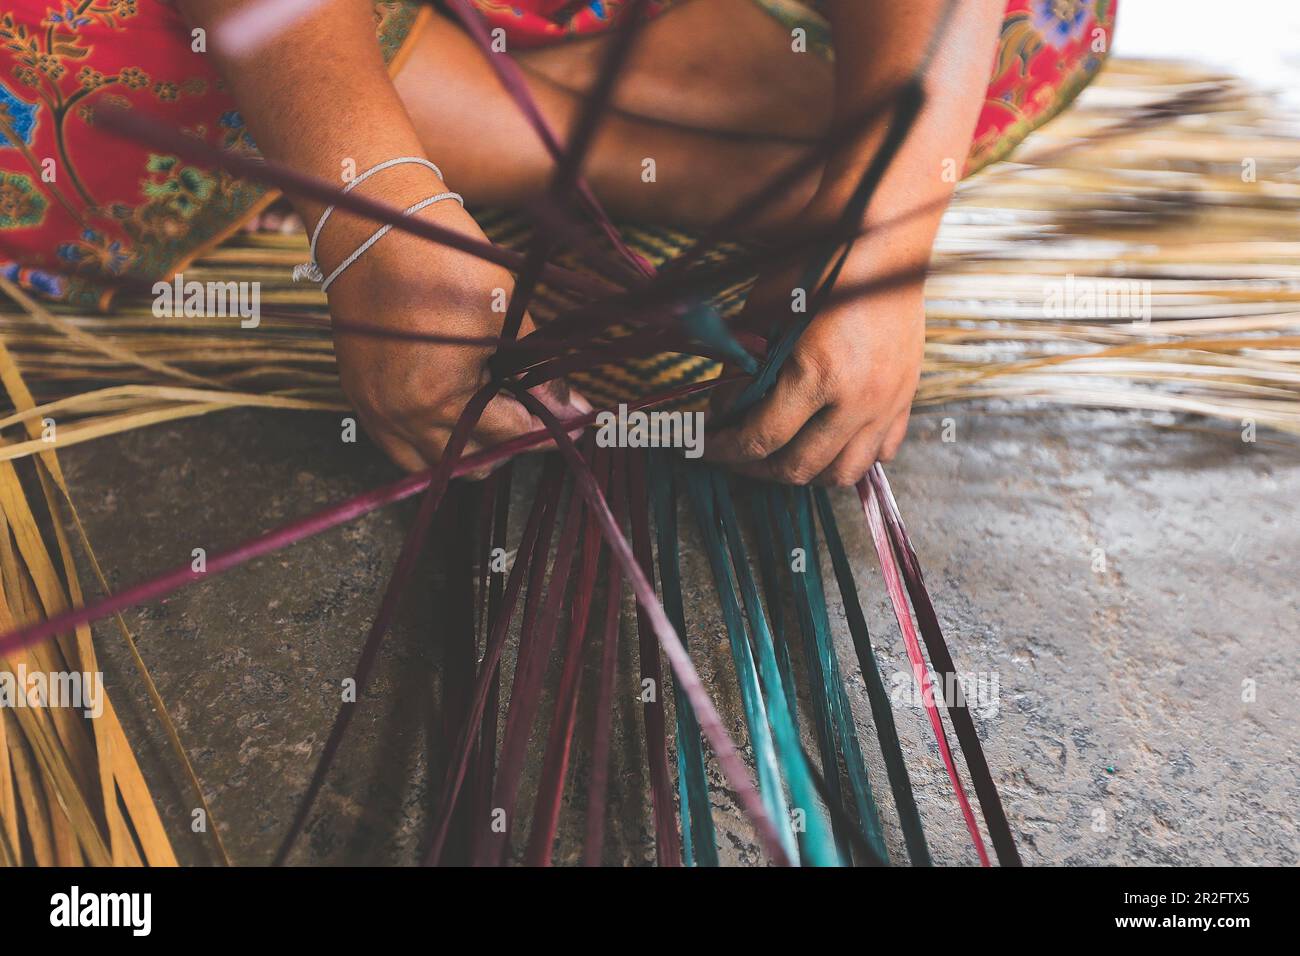 Selective focus on woman's hands weaving a krajood mat, Natural products from Taley Noi, Pattalung, Thailand Stock Photo